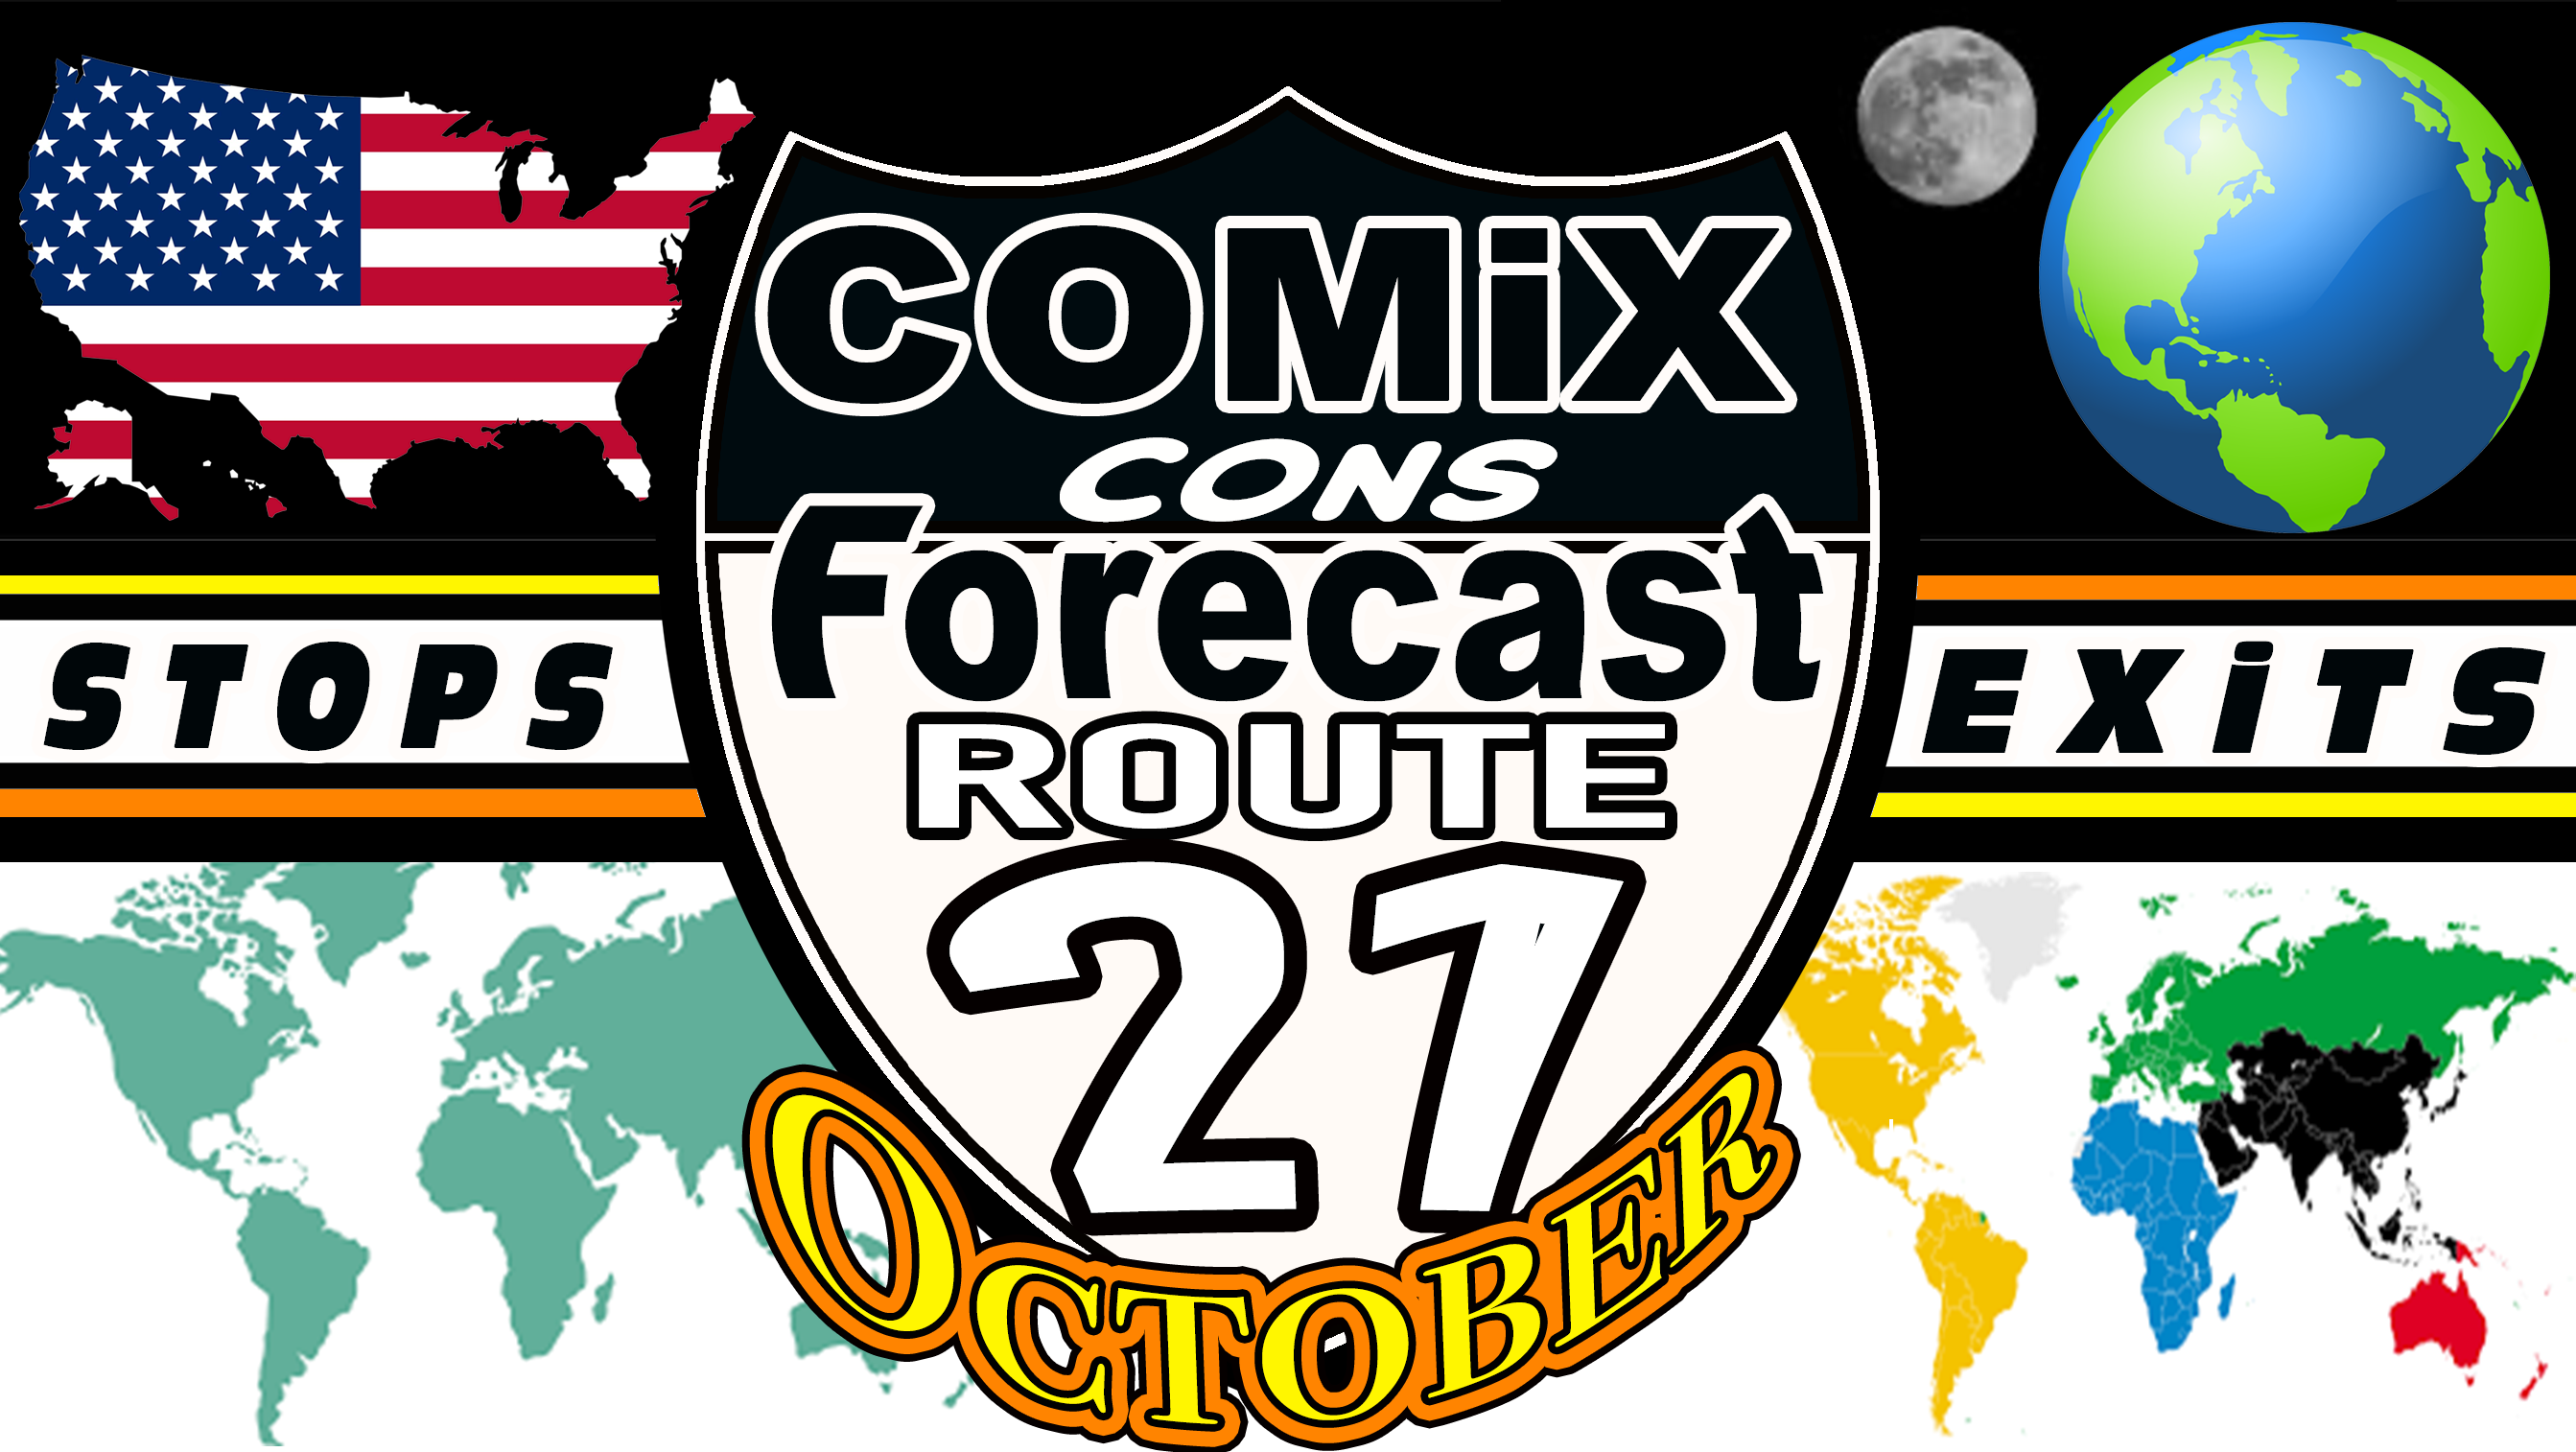 The COMiXcon ForeCast WEEK 39 –